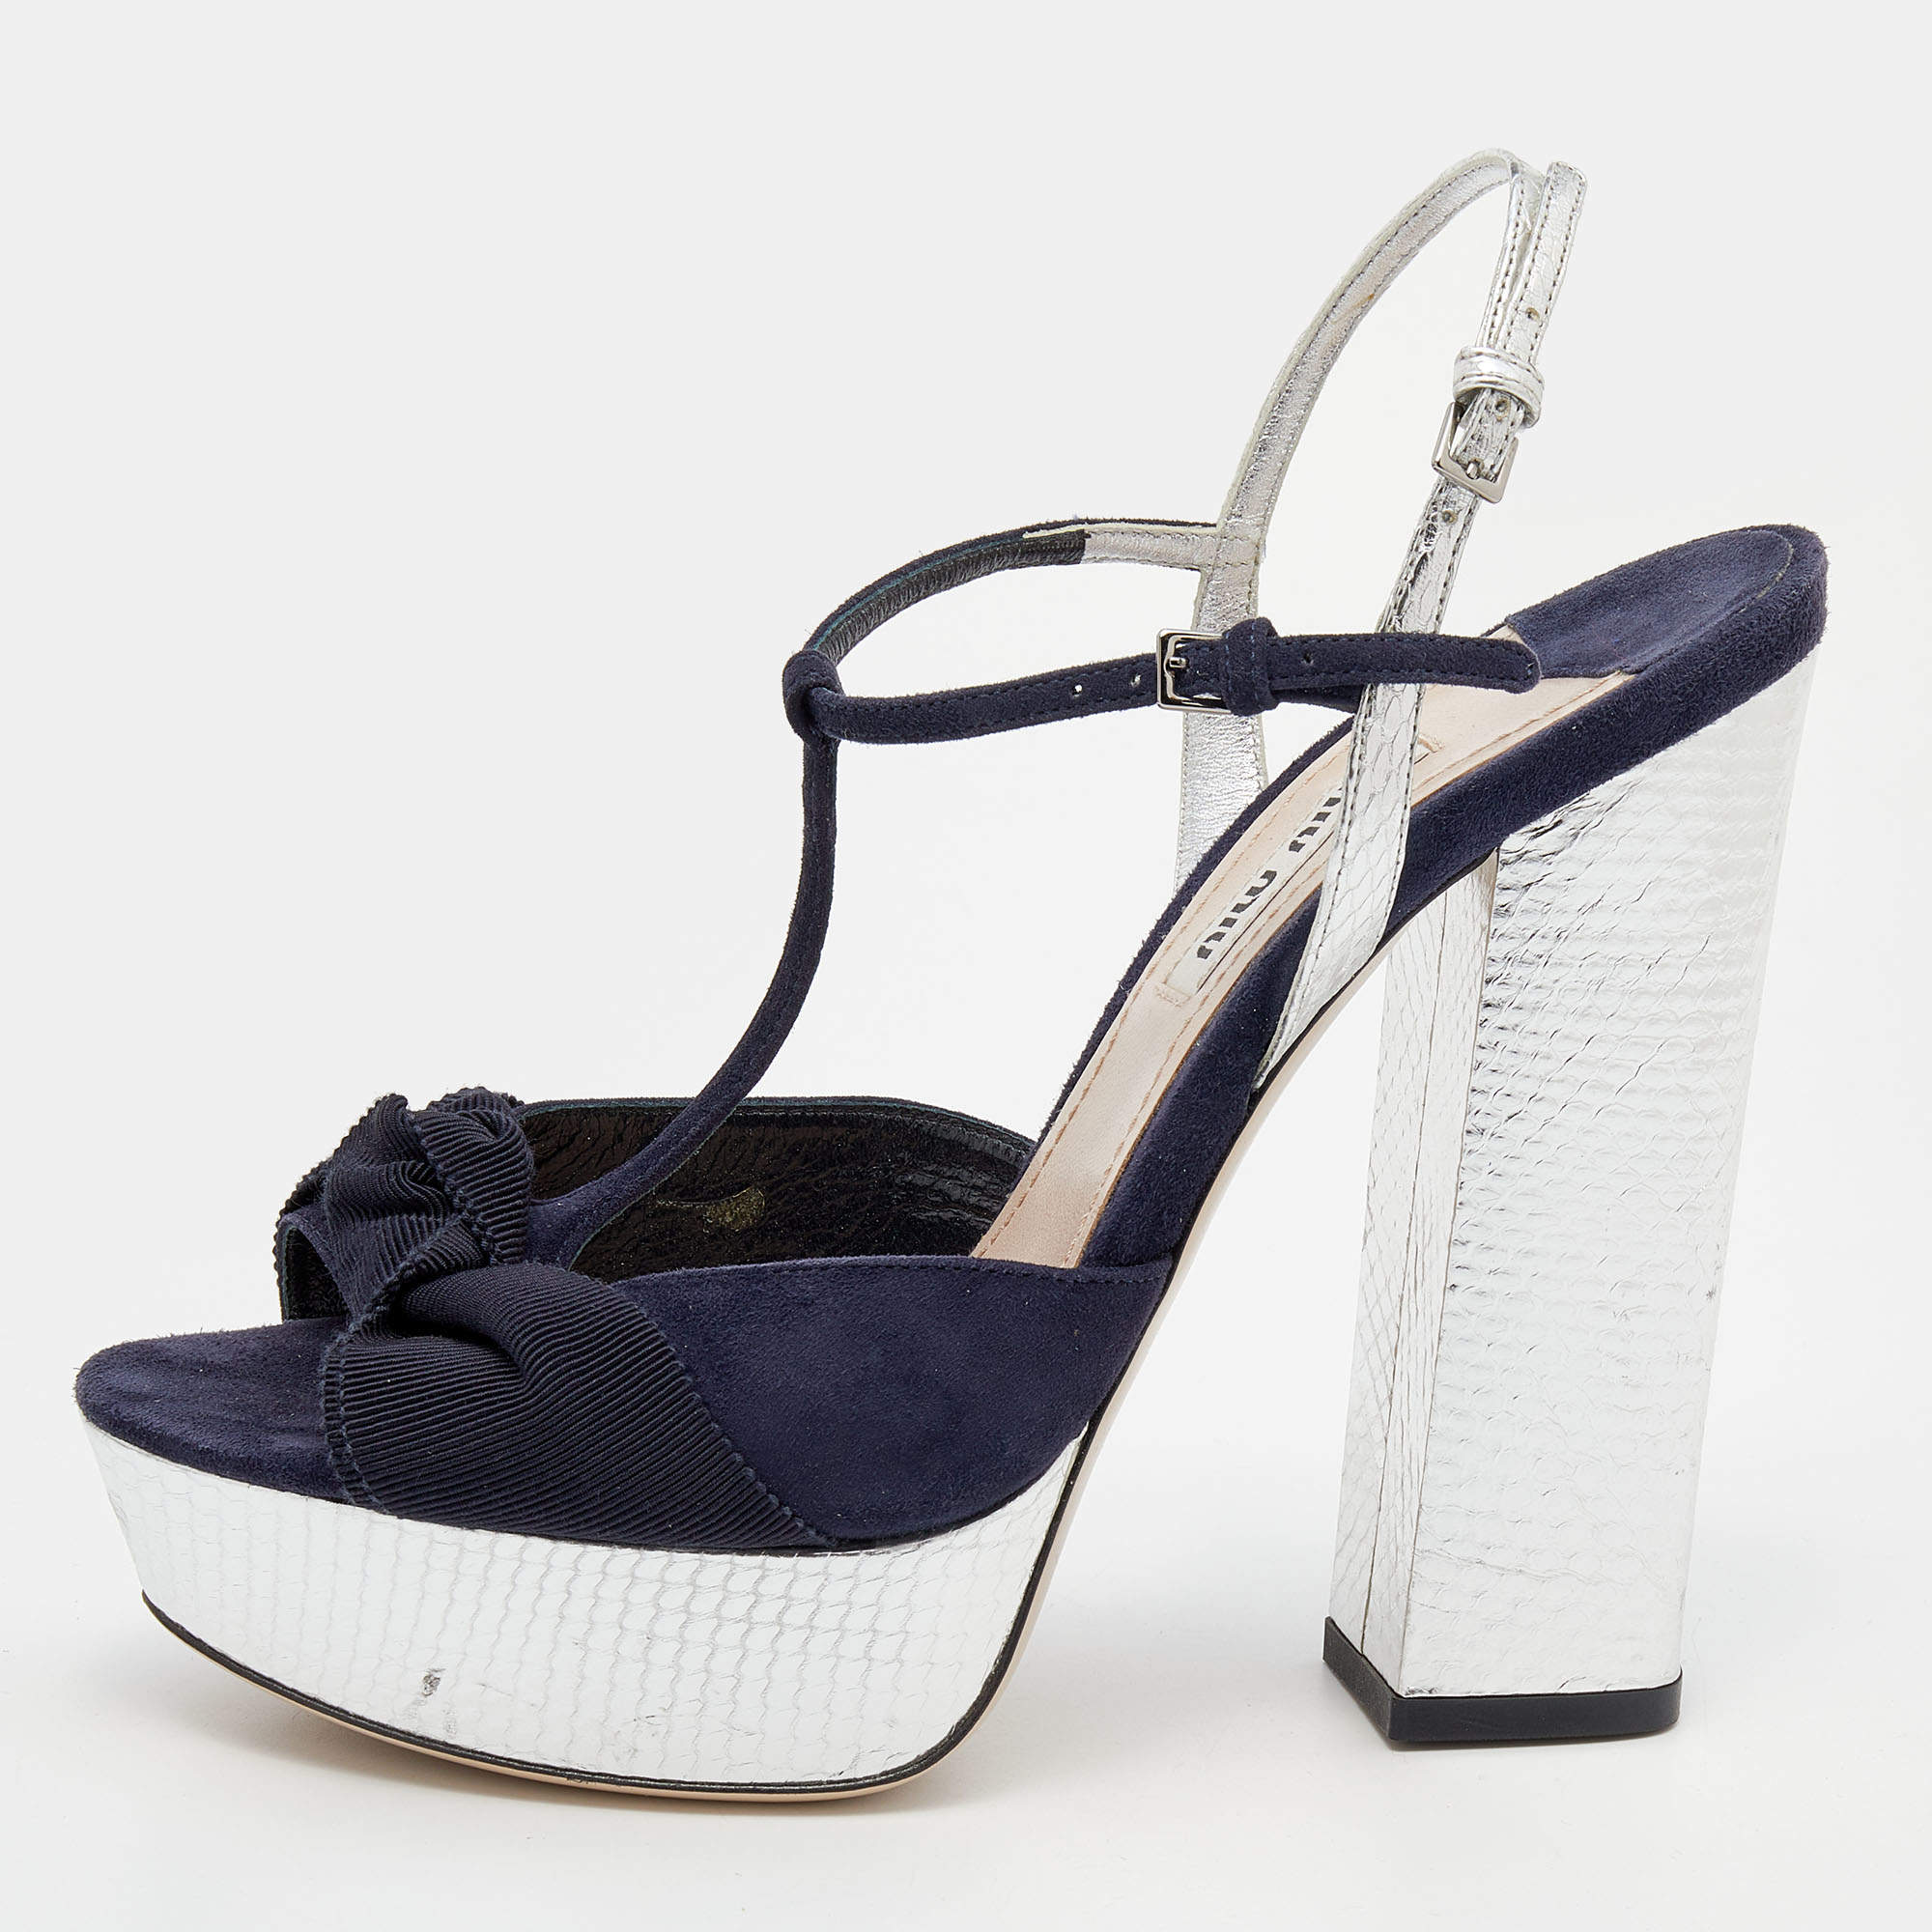 Miu Miu Navy Blue/Silver Suede and Snakeskin Embossed Leather T-Strap Platform Sandals Size 37